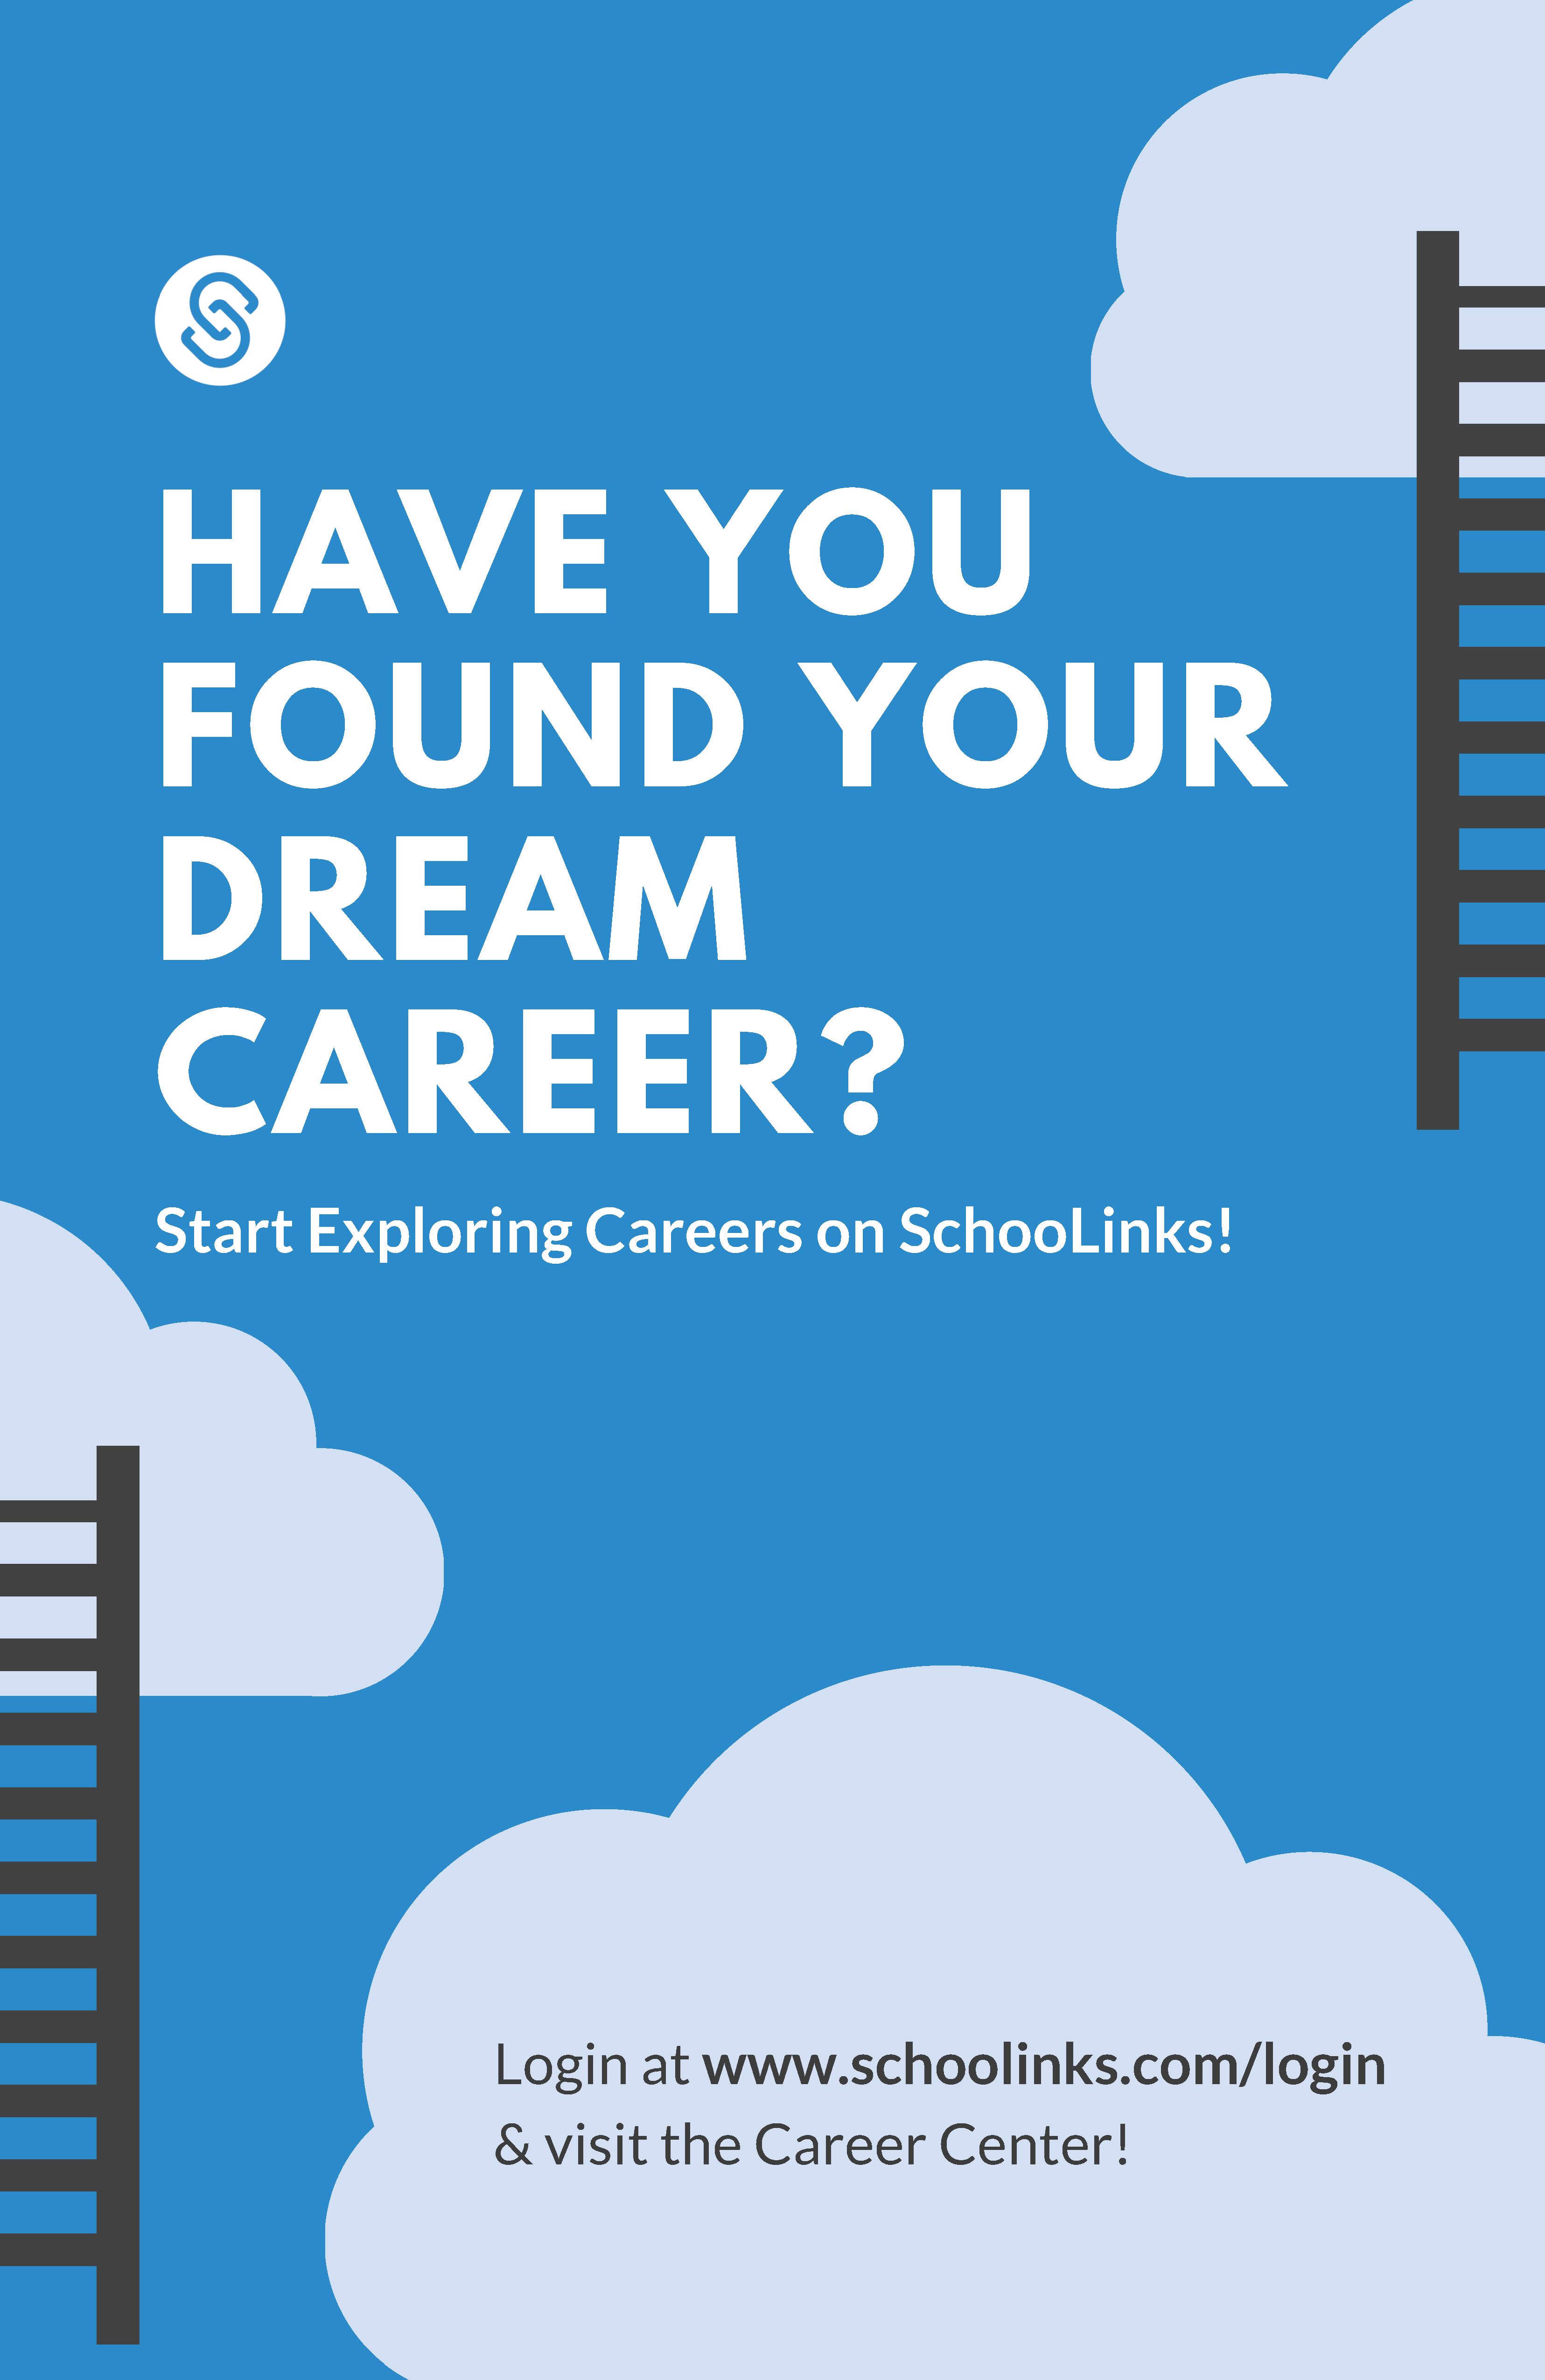 have you found your dream career?